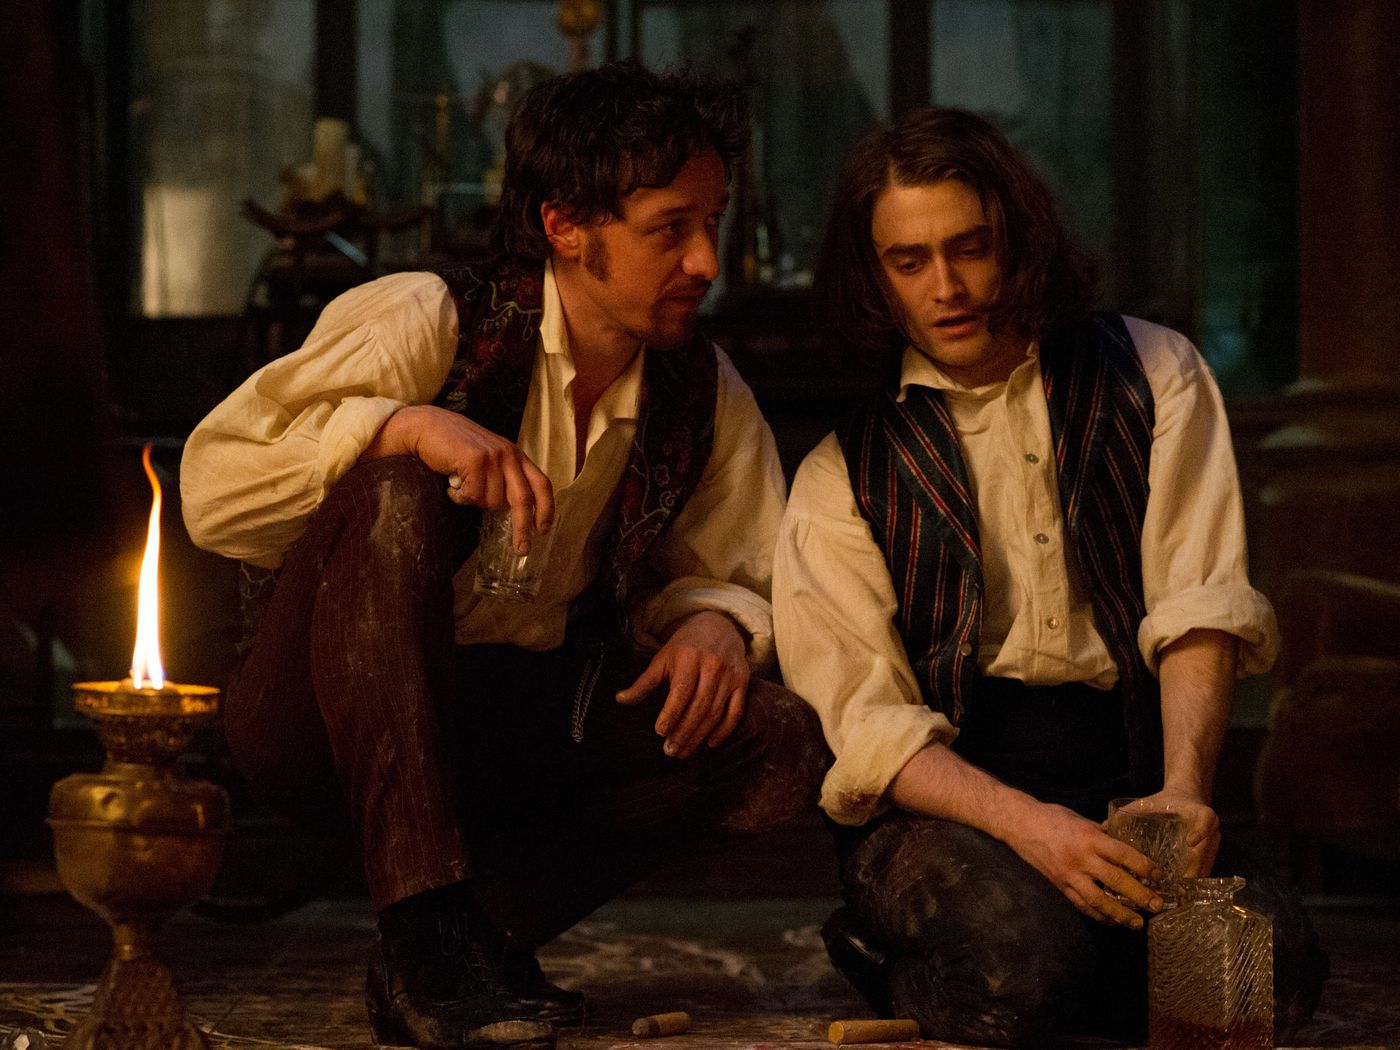 Review: Victor Frankenstein is a madcap, ultimately pointless bromance